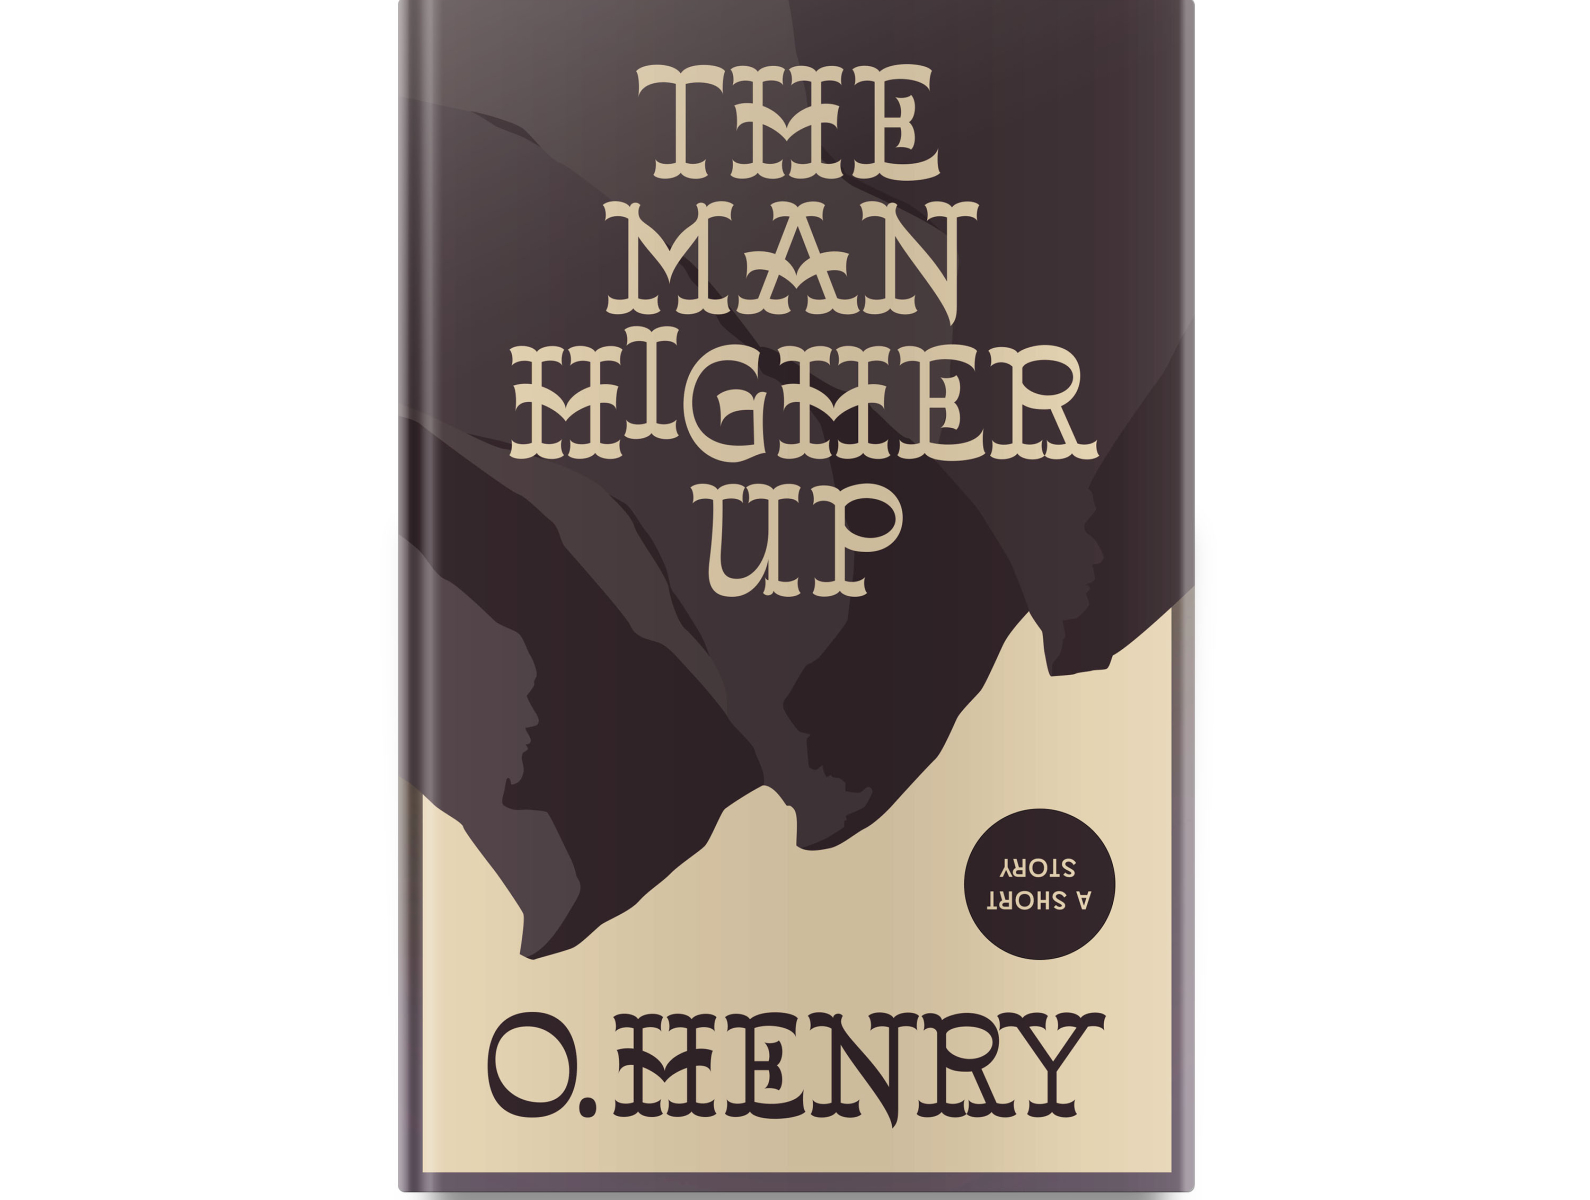 The Man Higher Up by O.Henry Book Cover book cover illustration lettering typography